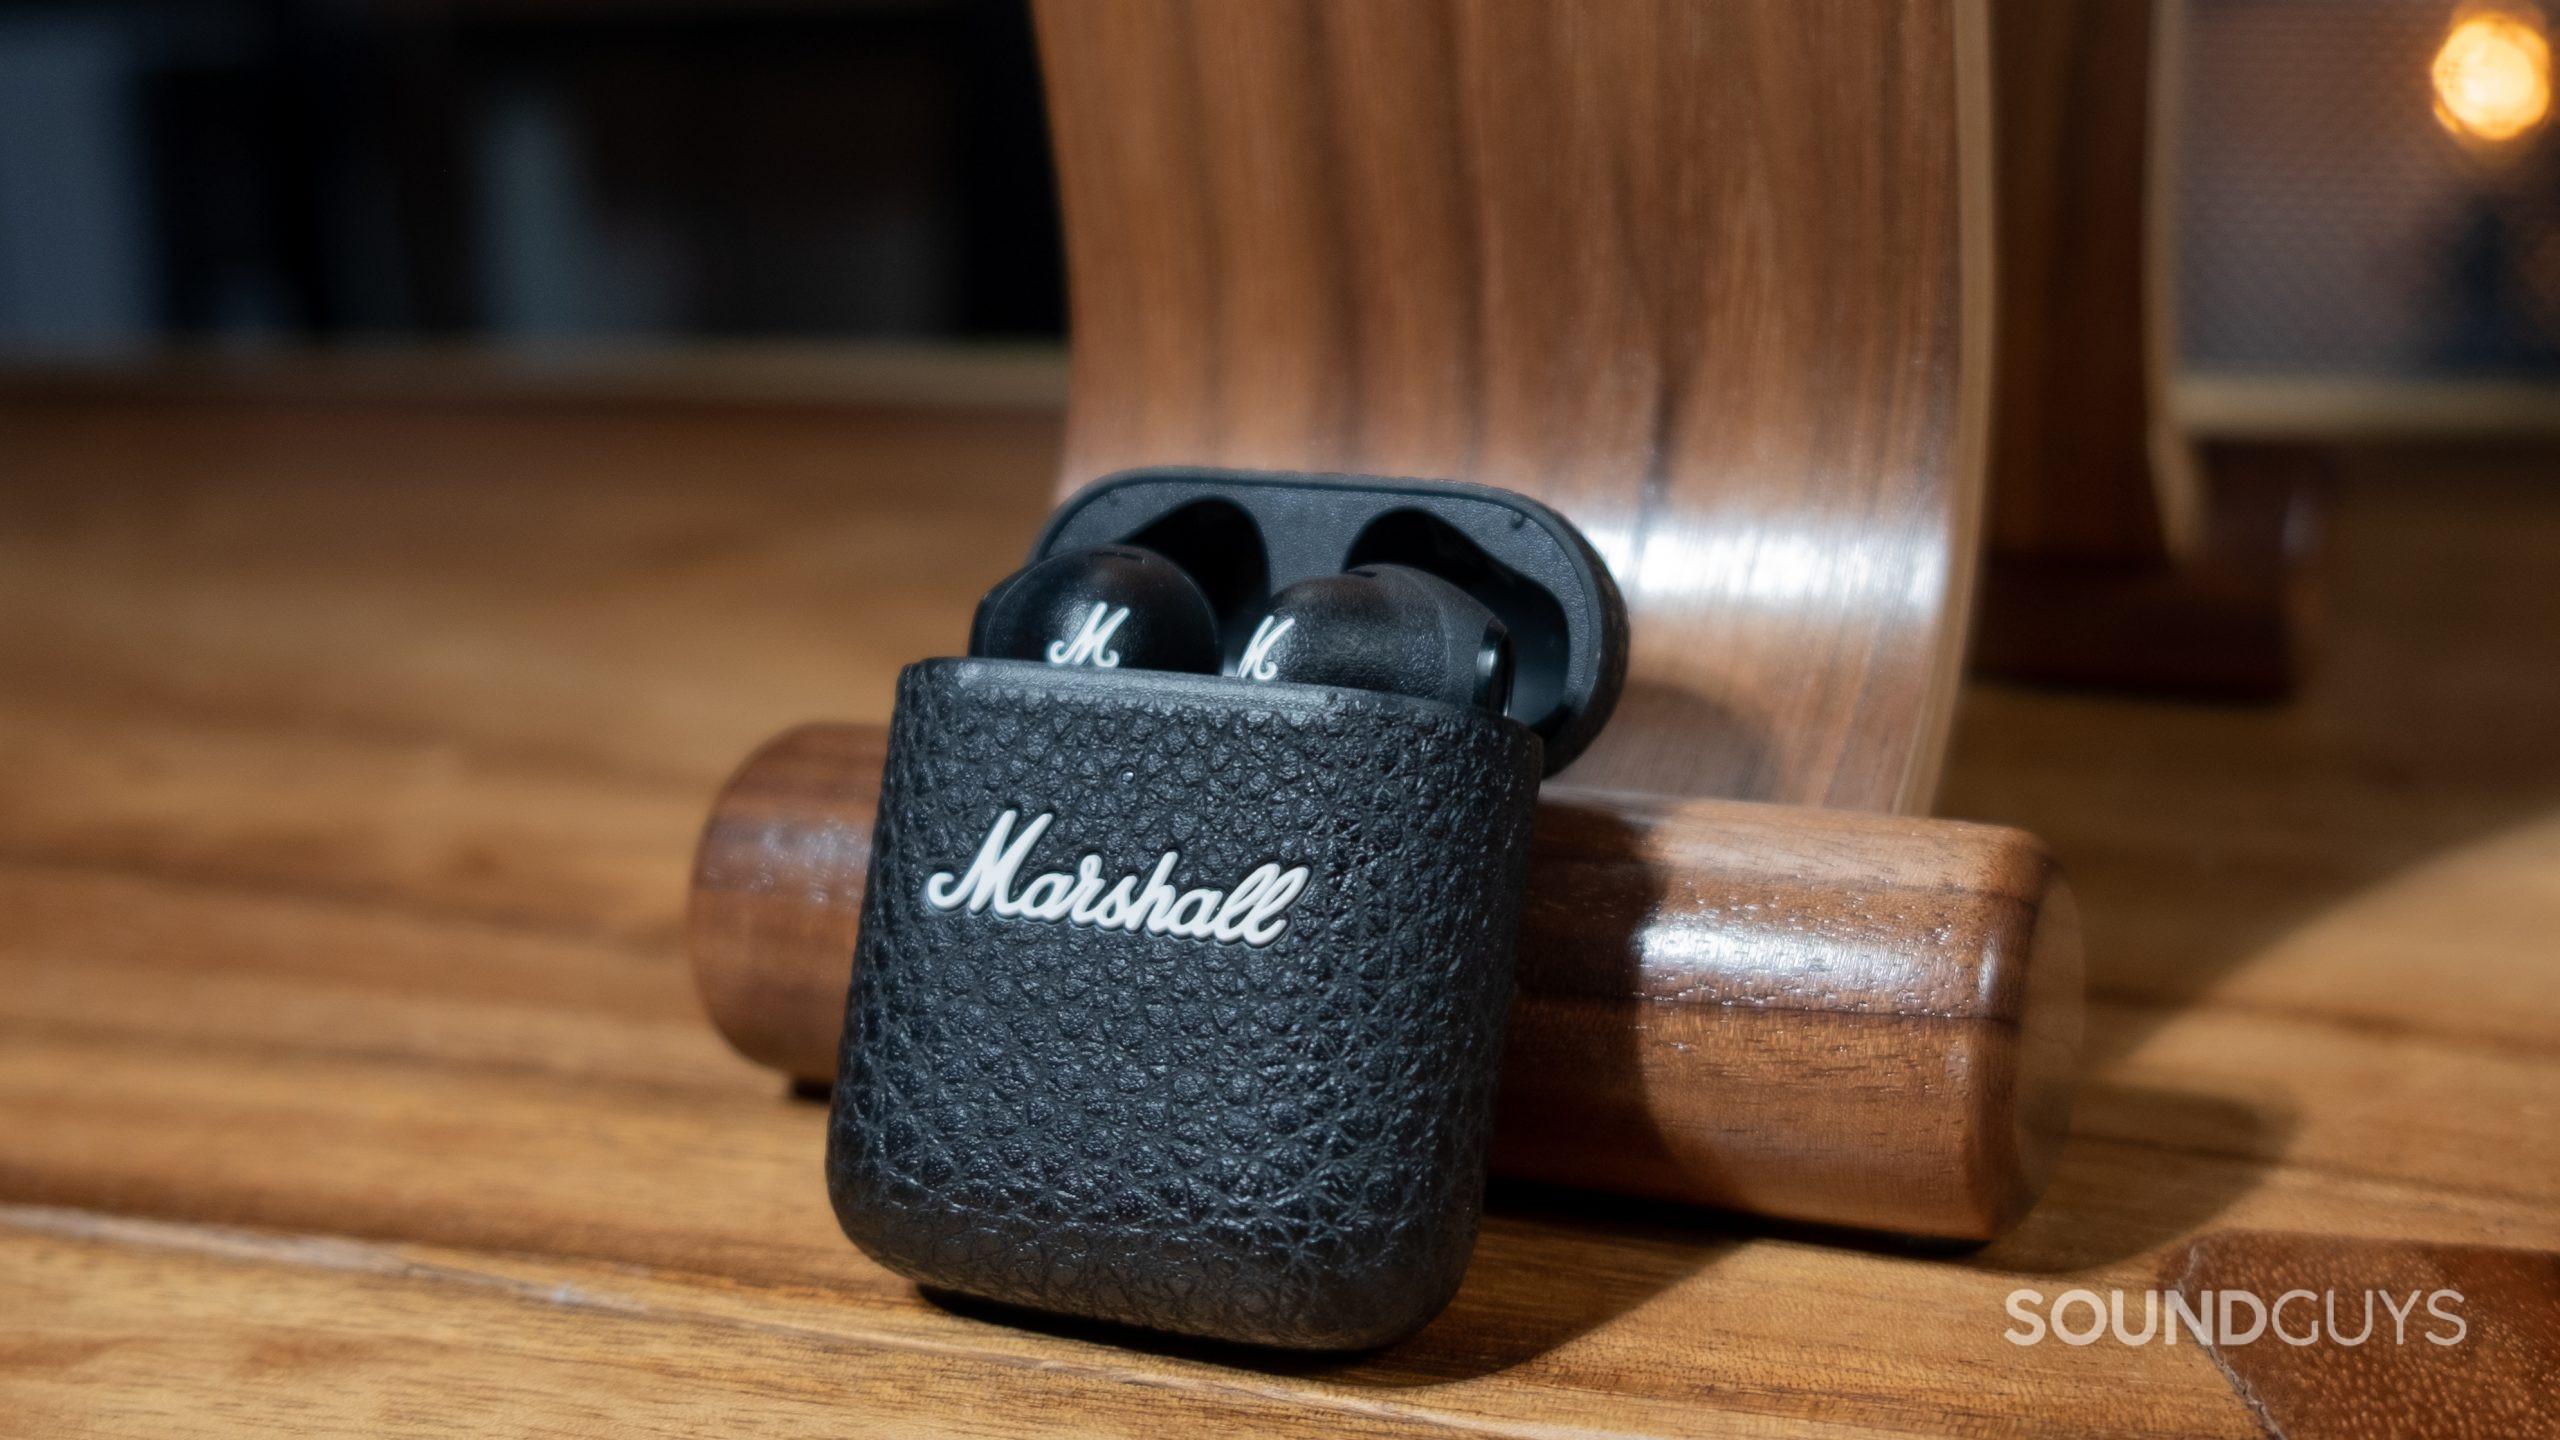 Marshall - Poor fit and Minor SoundGuys review: finish III